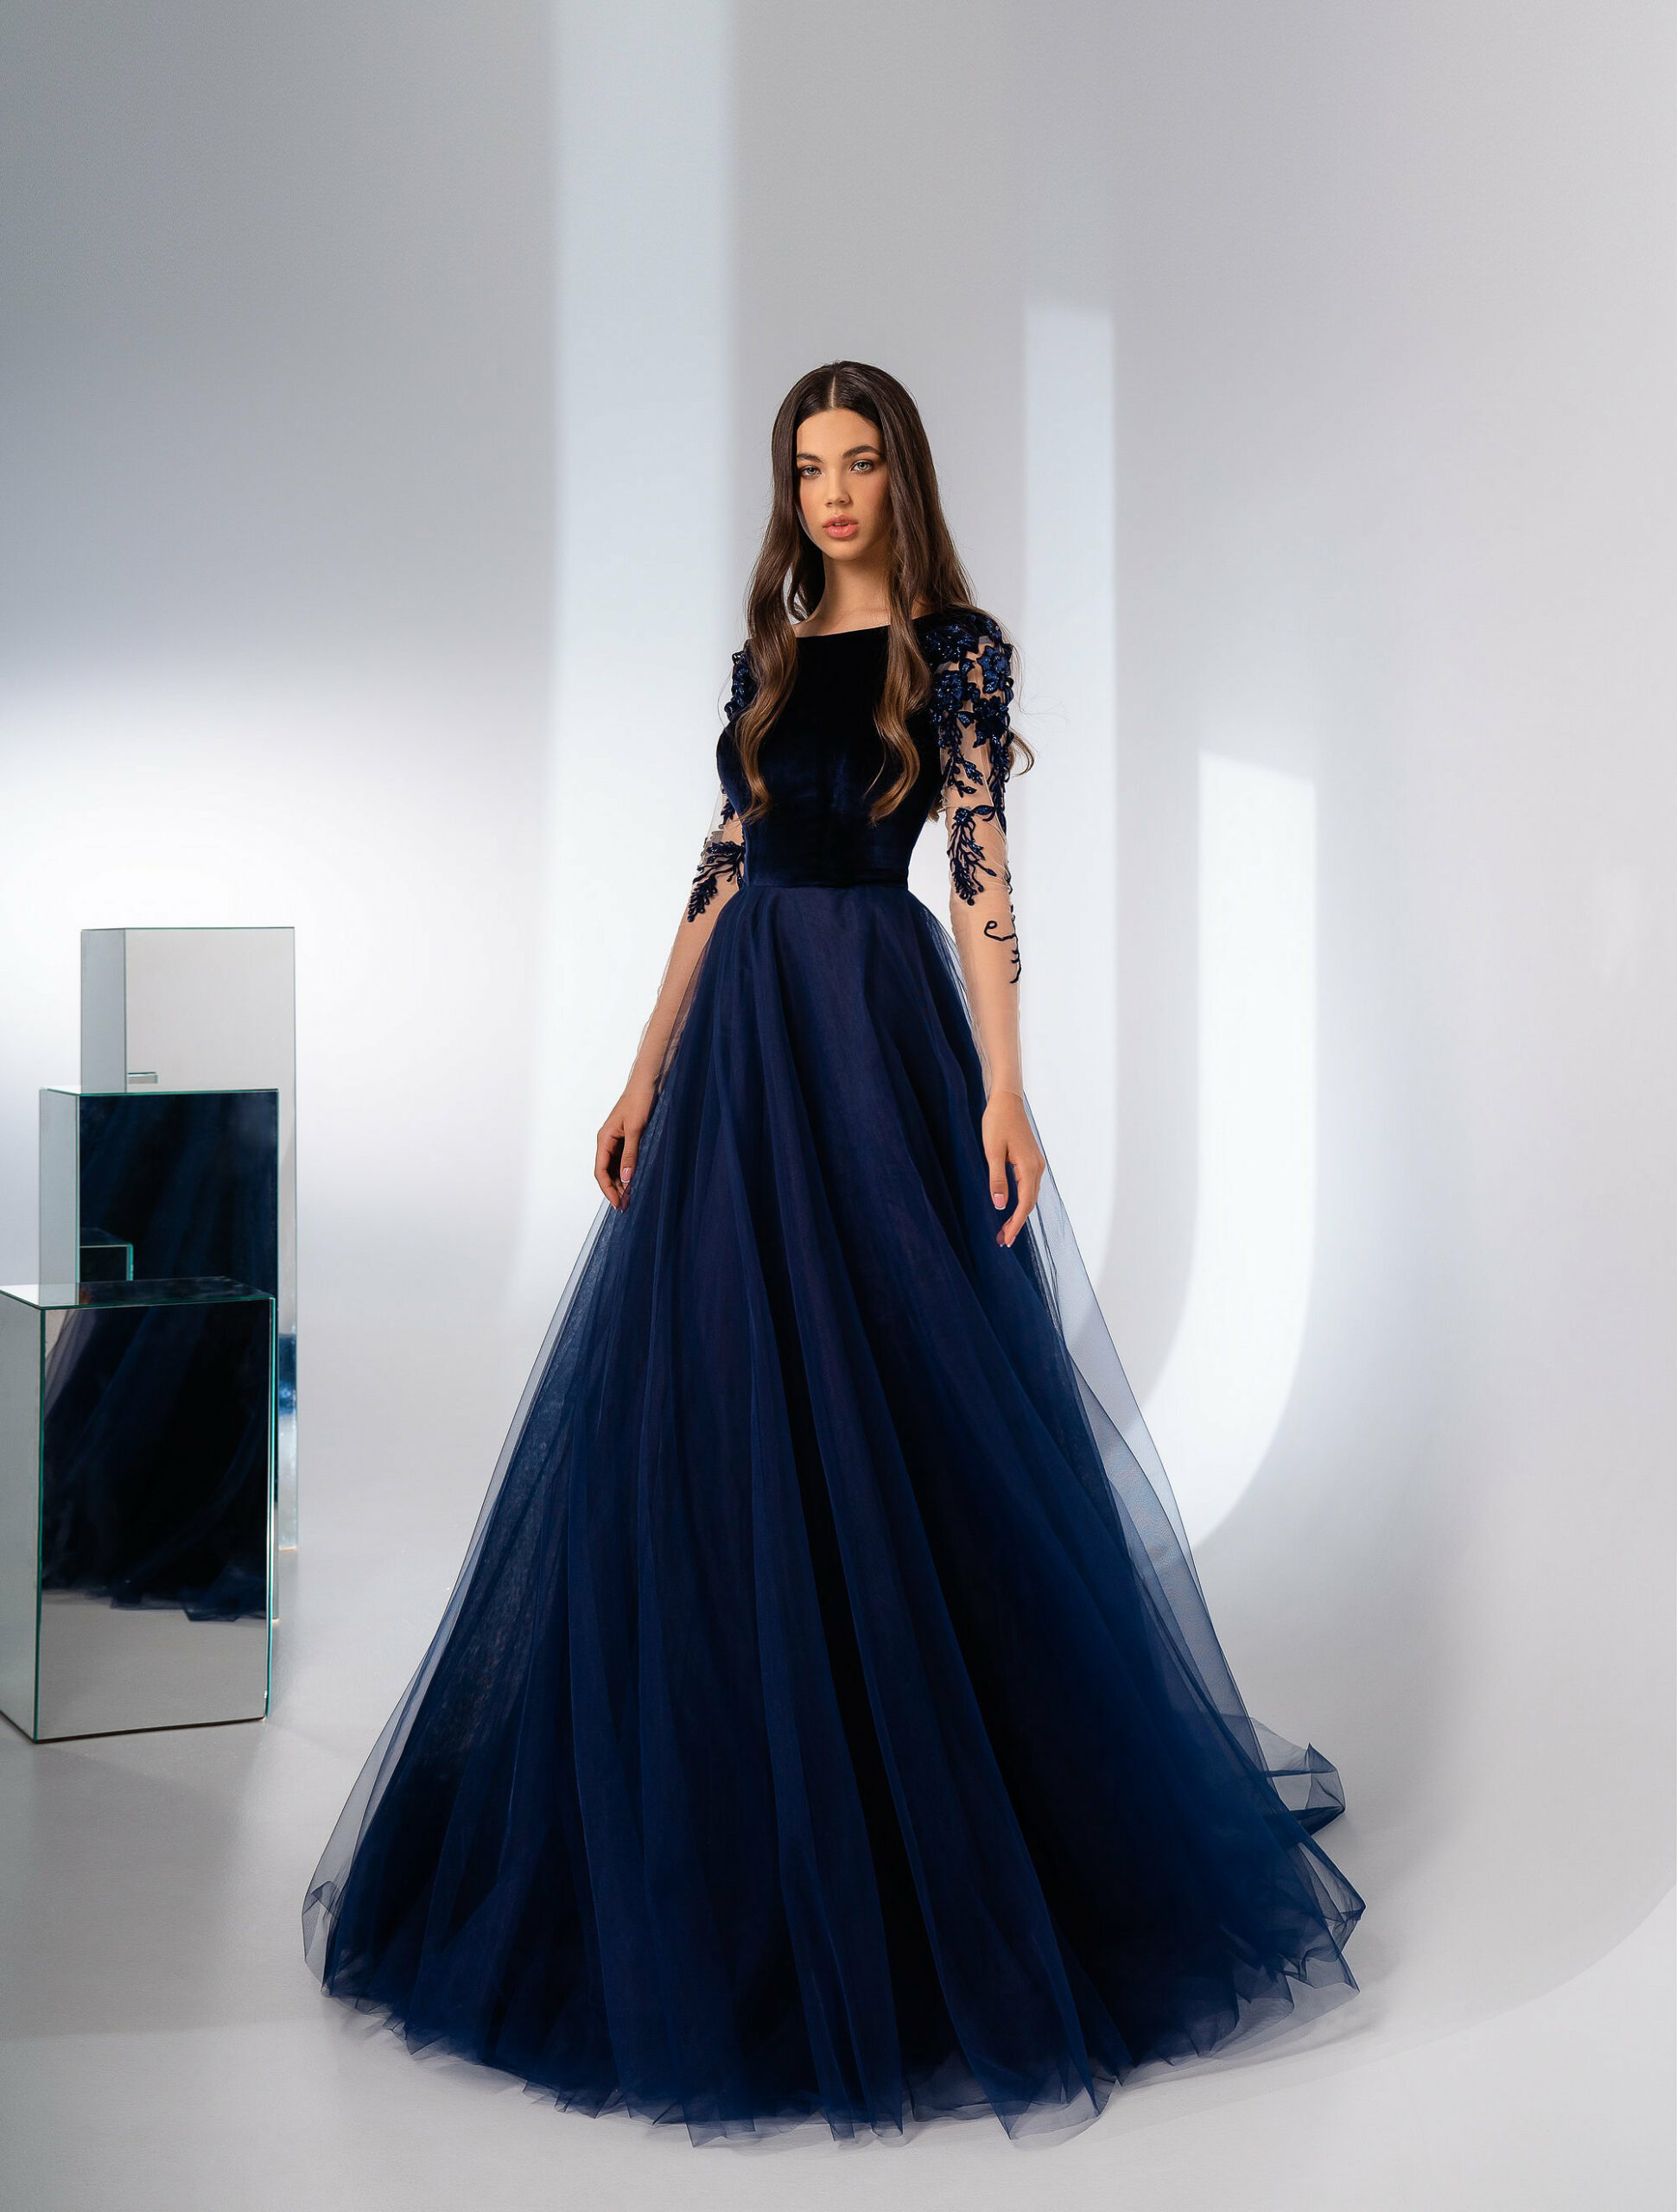 Wholesale EV105 Long Elegant Prom Dresses Long Sleeve Sheer O-neck Mermaid  Style Royal Blue Sequin African Black Girls Prom Party Gown From  m.alibaba.com